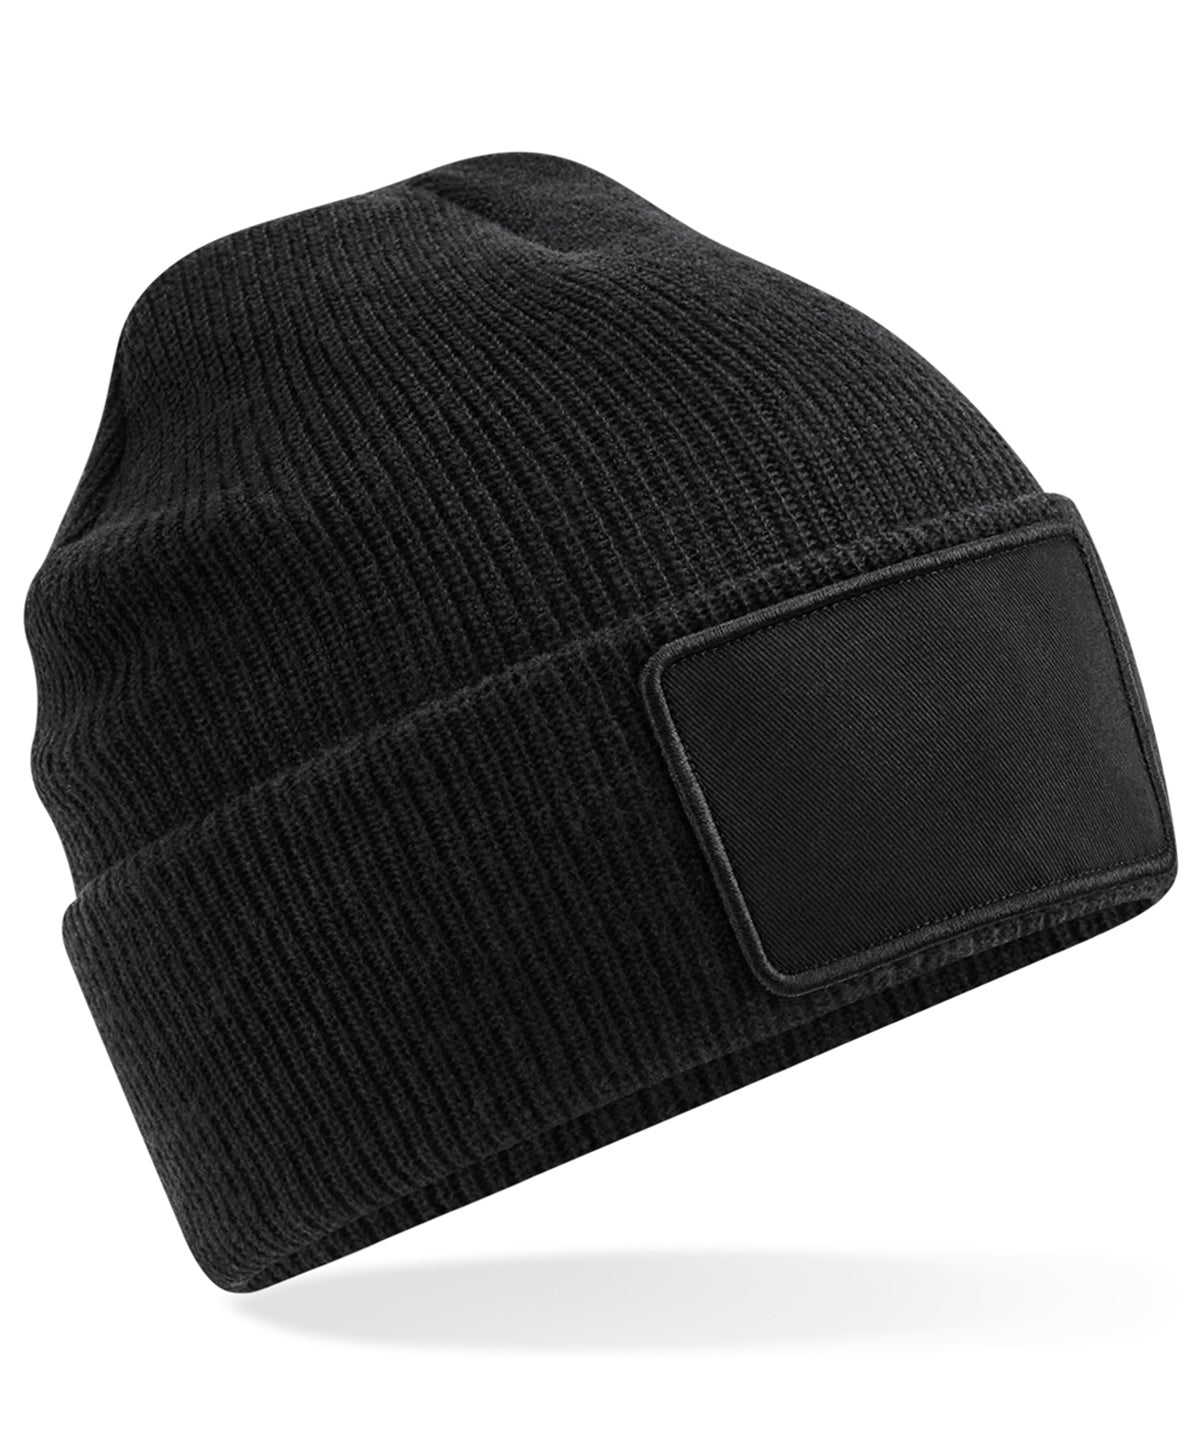 Personalised Hats - Black Beechfield Removable patch Thinsulate™ beanie